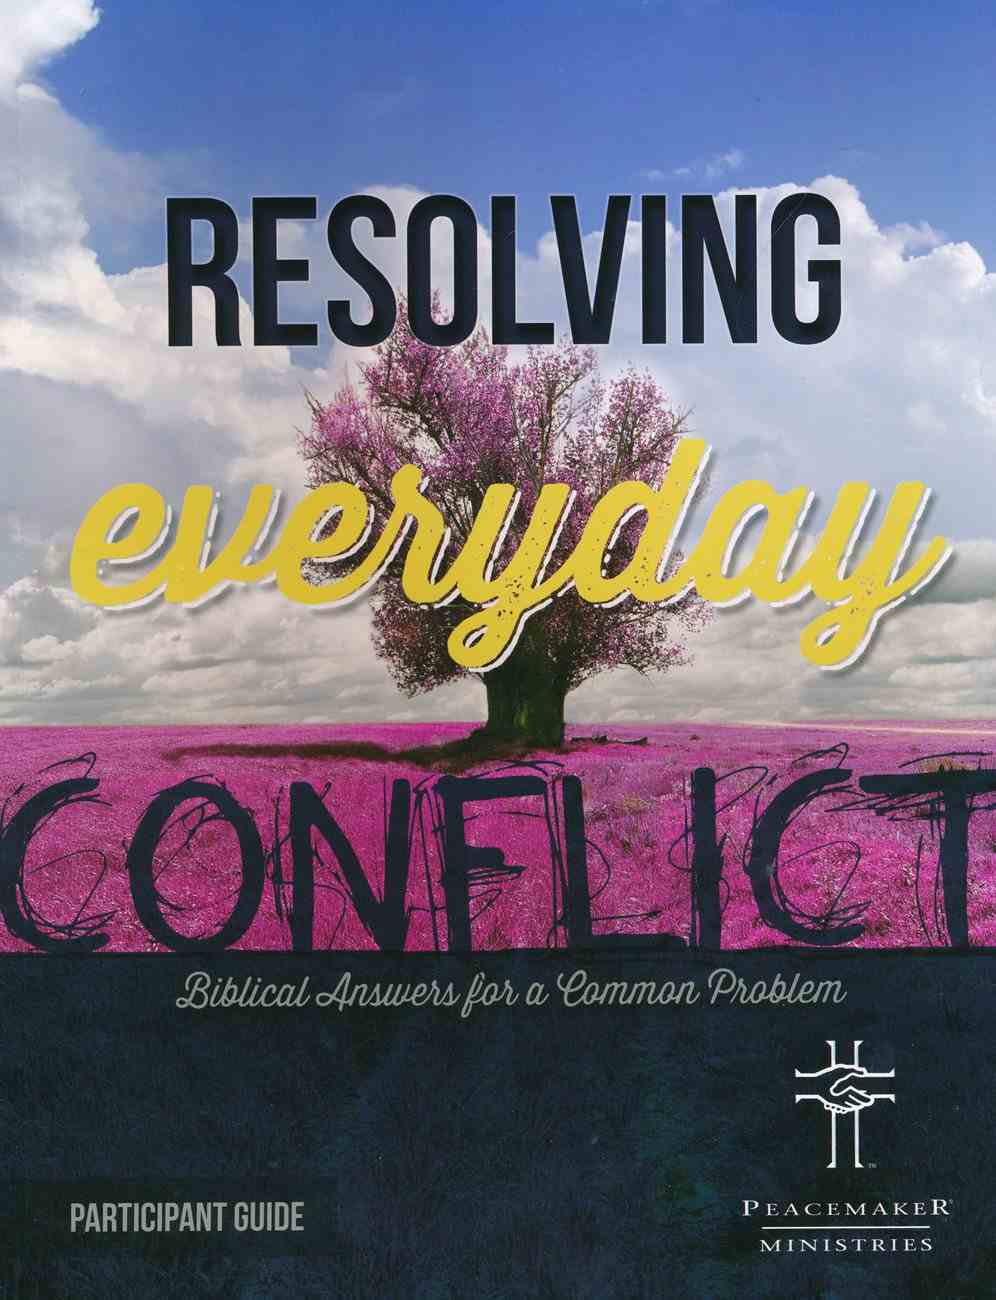 Resolving Everday Conflict (Participant Guide) Paperback